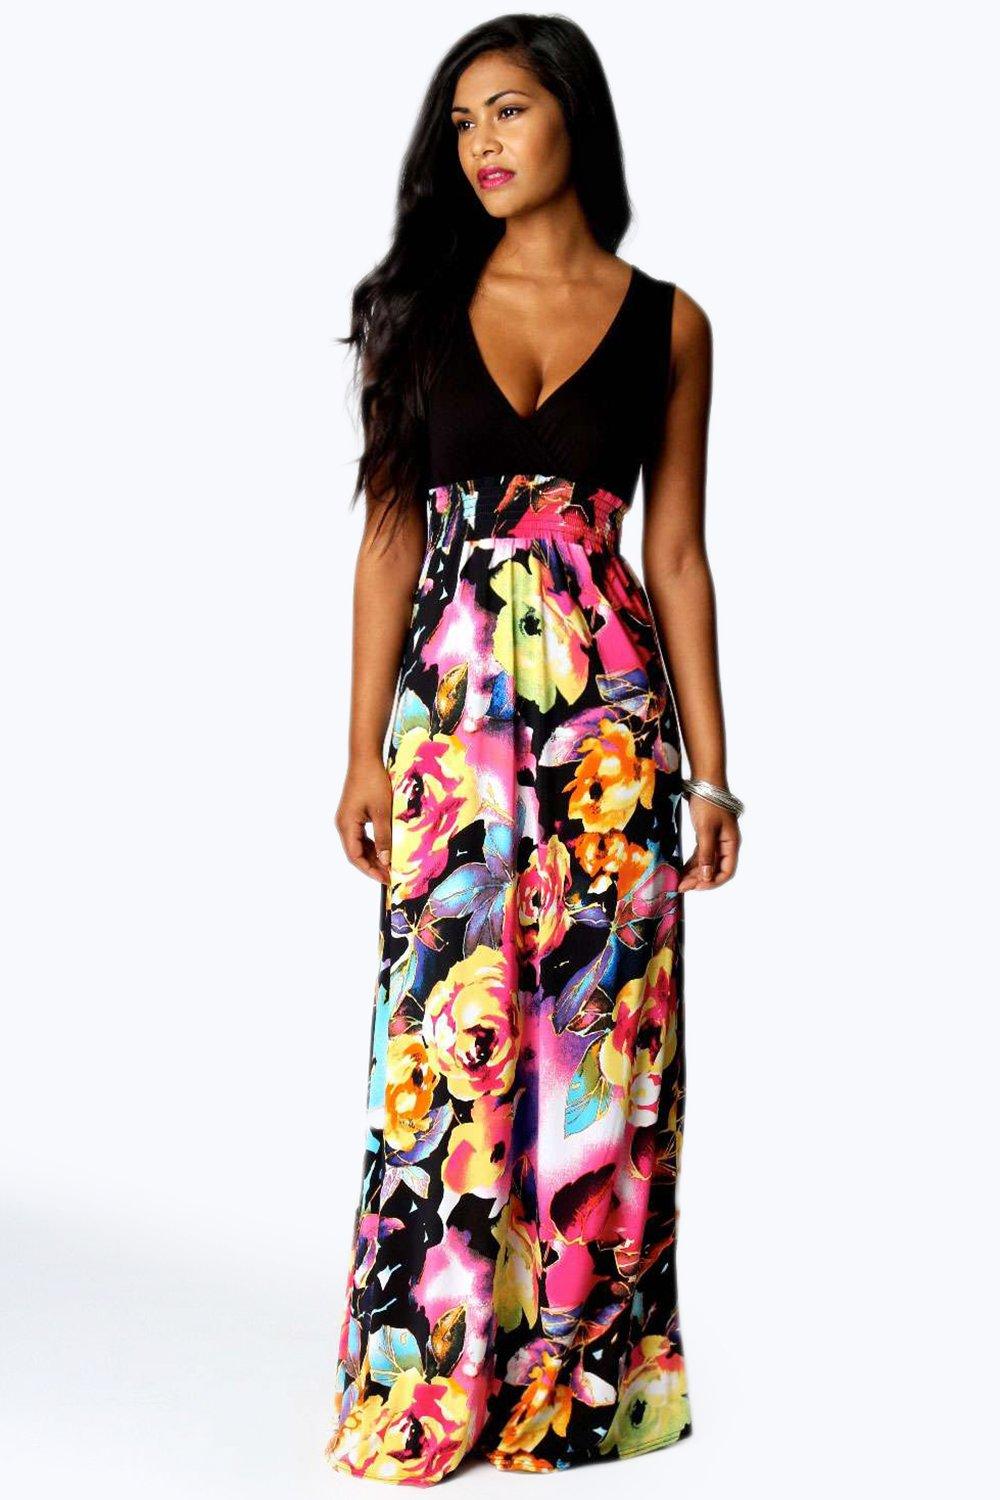 maxi dresses for petite height